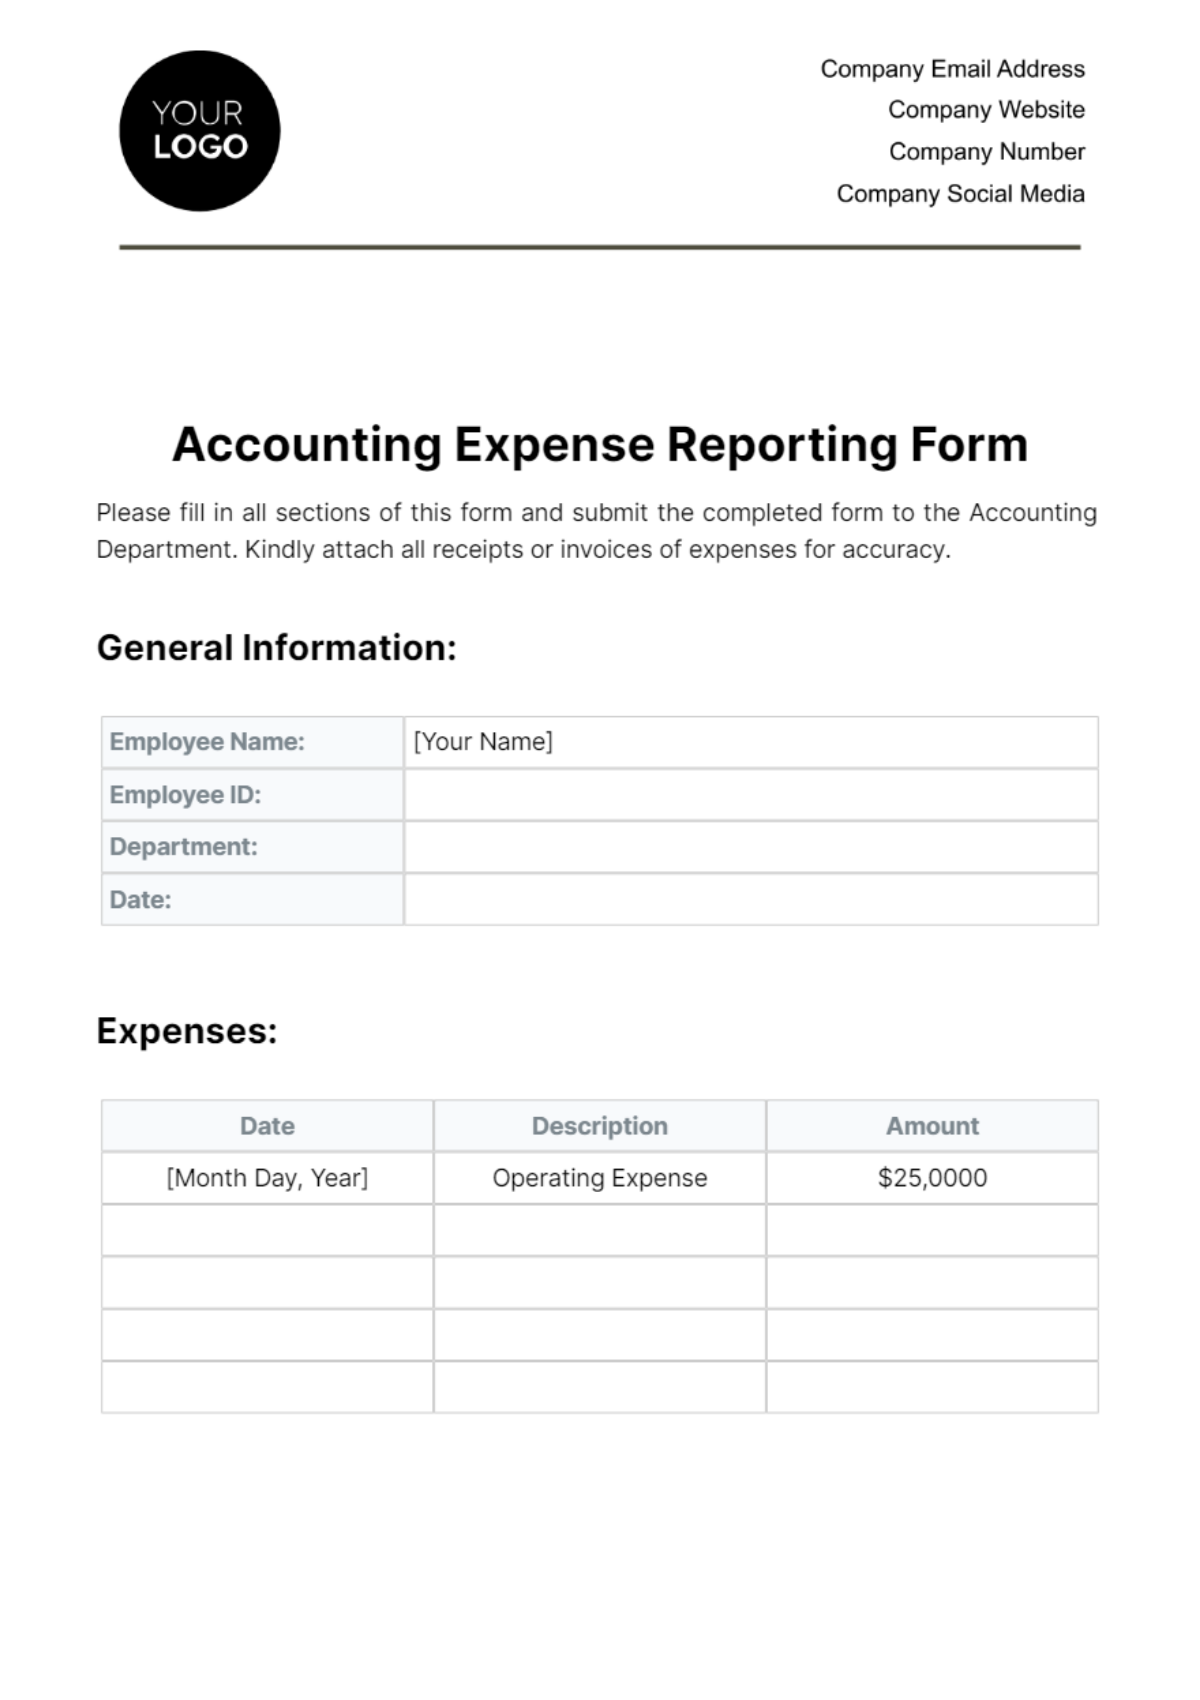 Accounting Expense Reporting Form Template